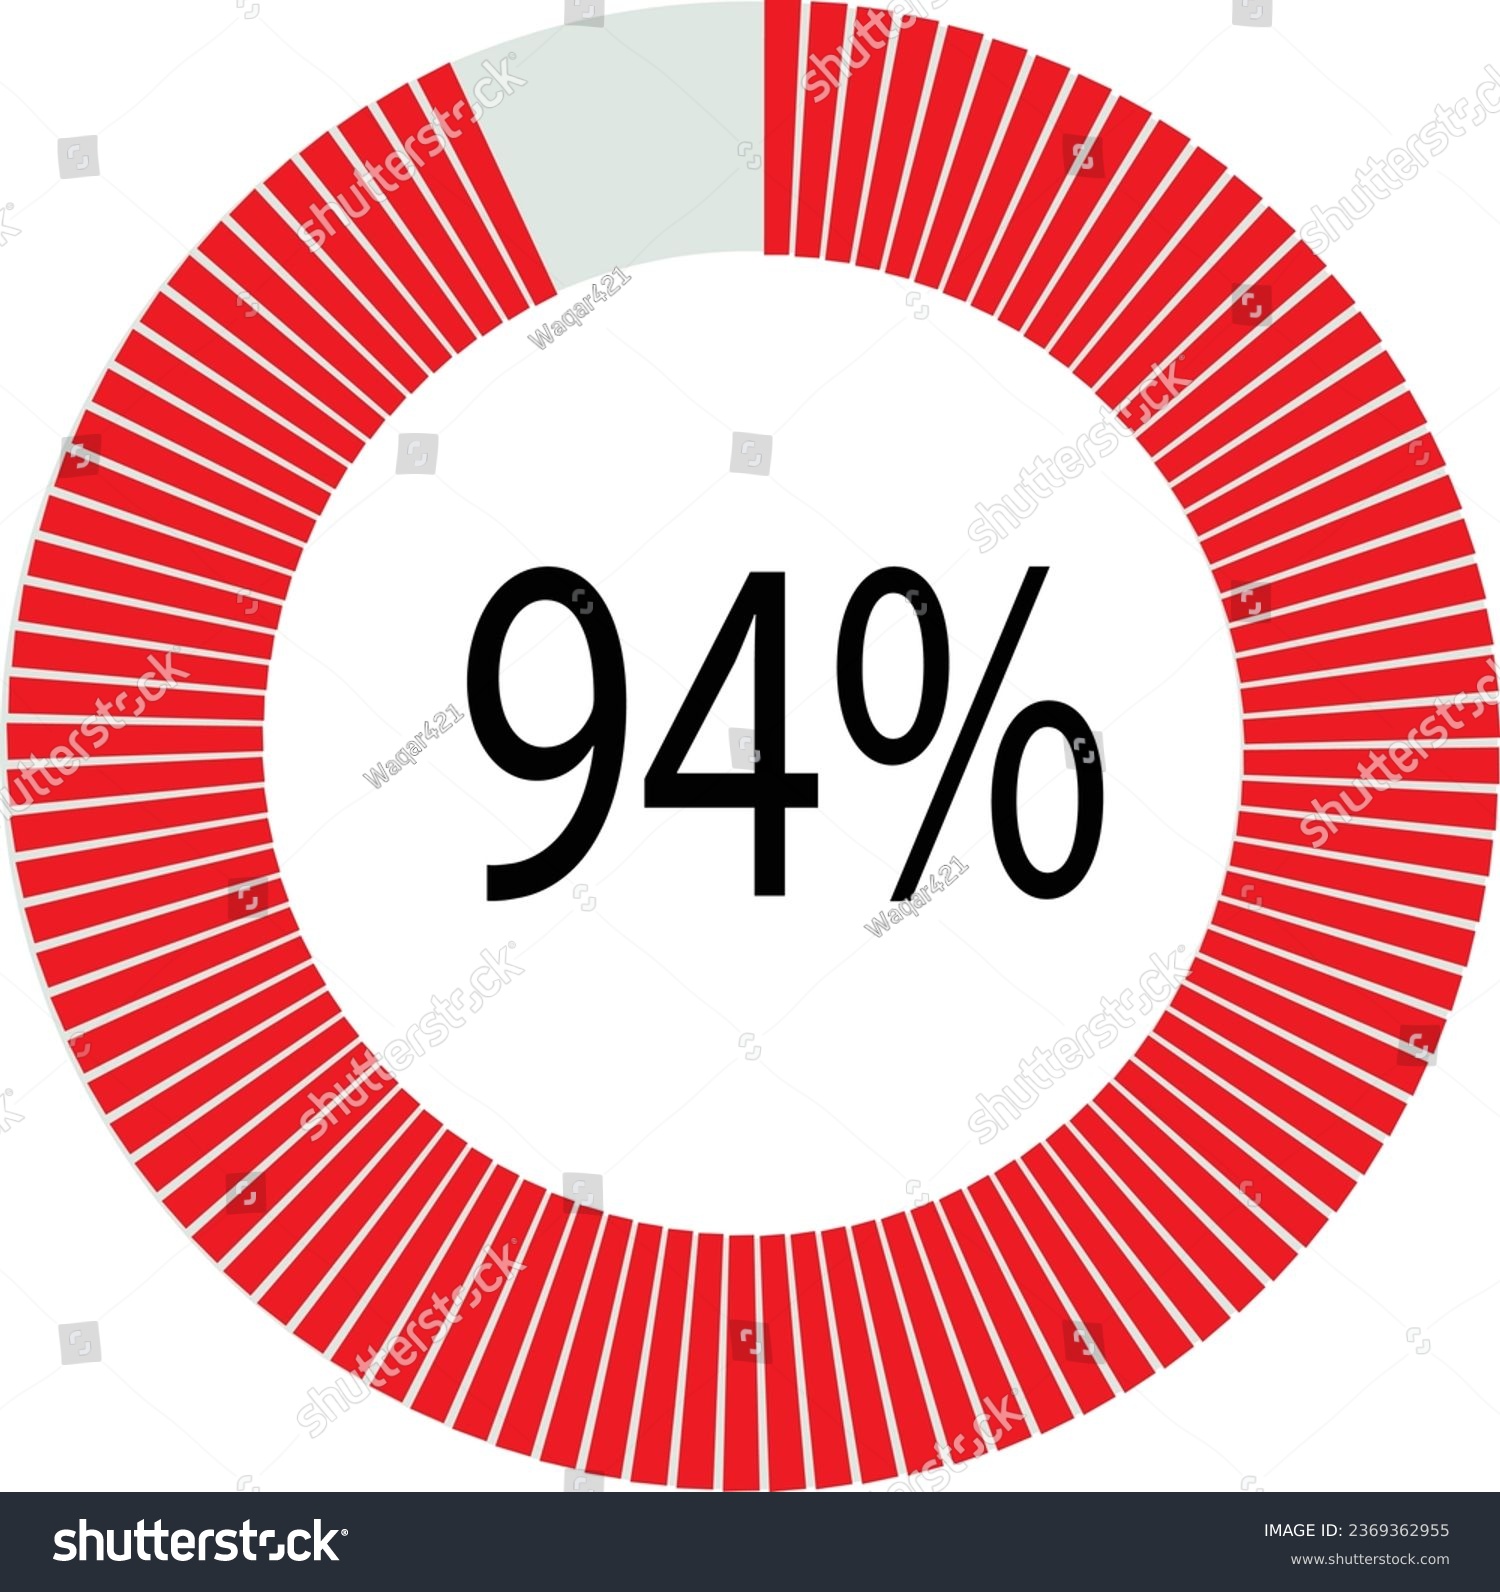 SVG of 94% Loading. Circle percentage diagrams 94% ready to use for web design, user interface (UI) or infographic, for business , indicator isolated on transparent background. svg